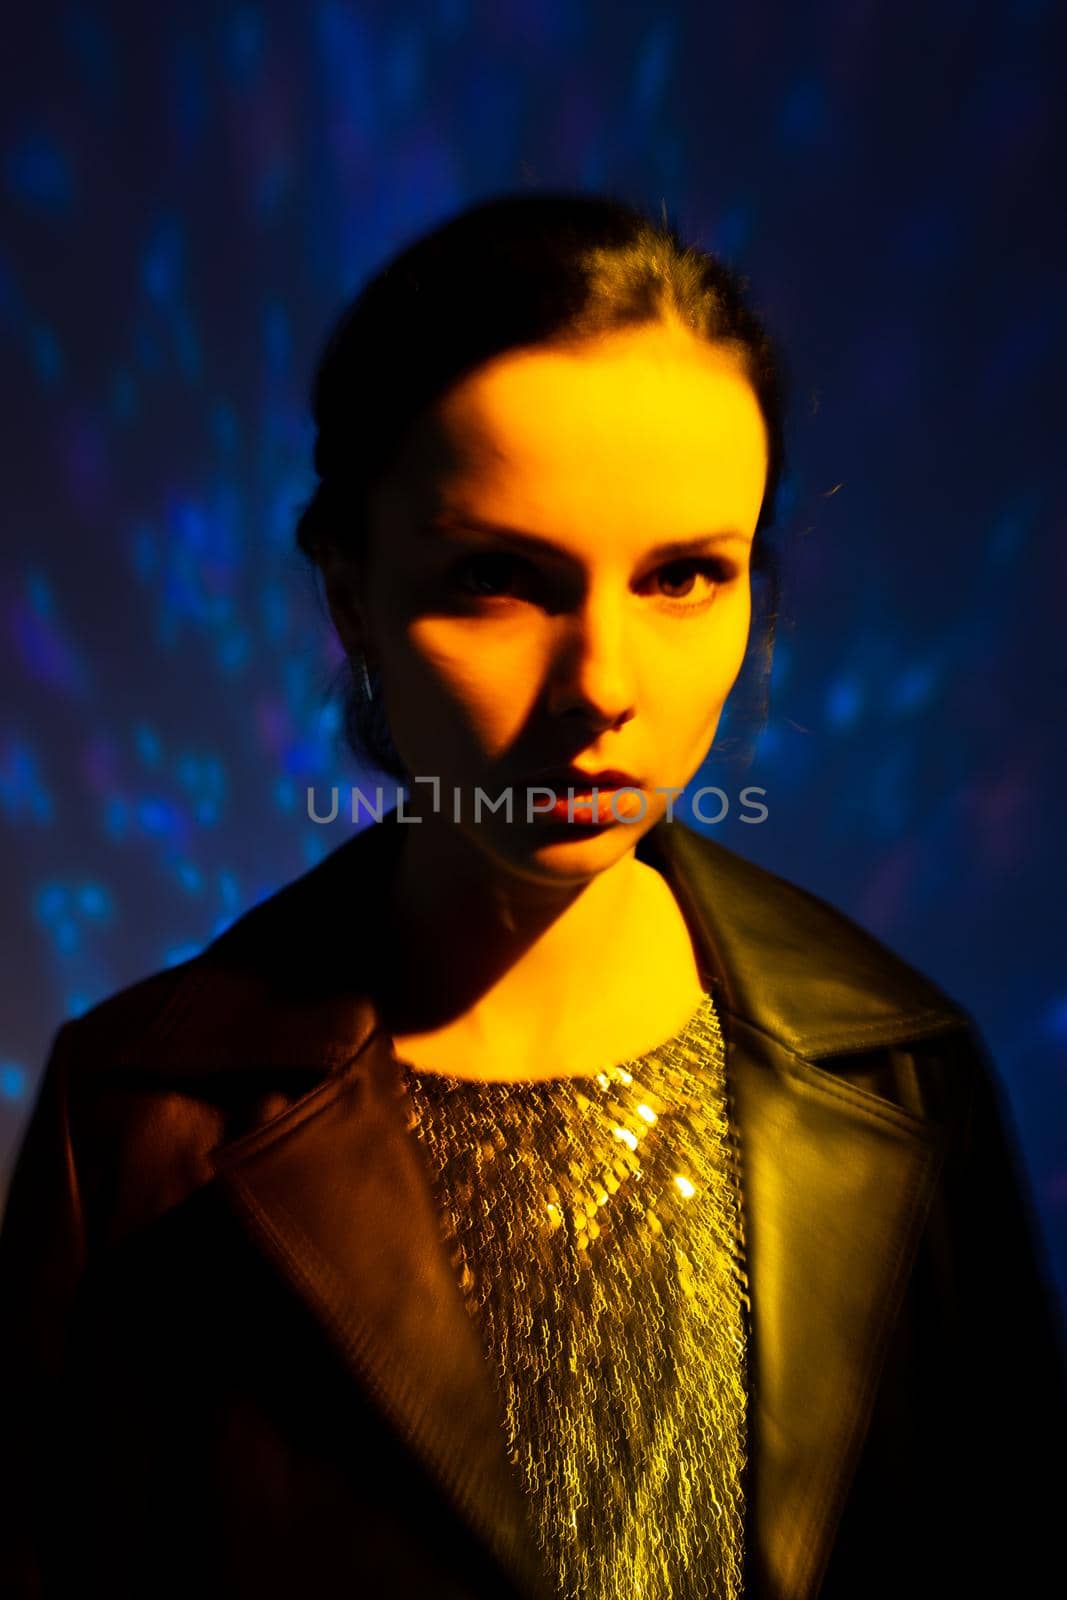 woman with yellow light, colored background, art portrait. High quality photo